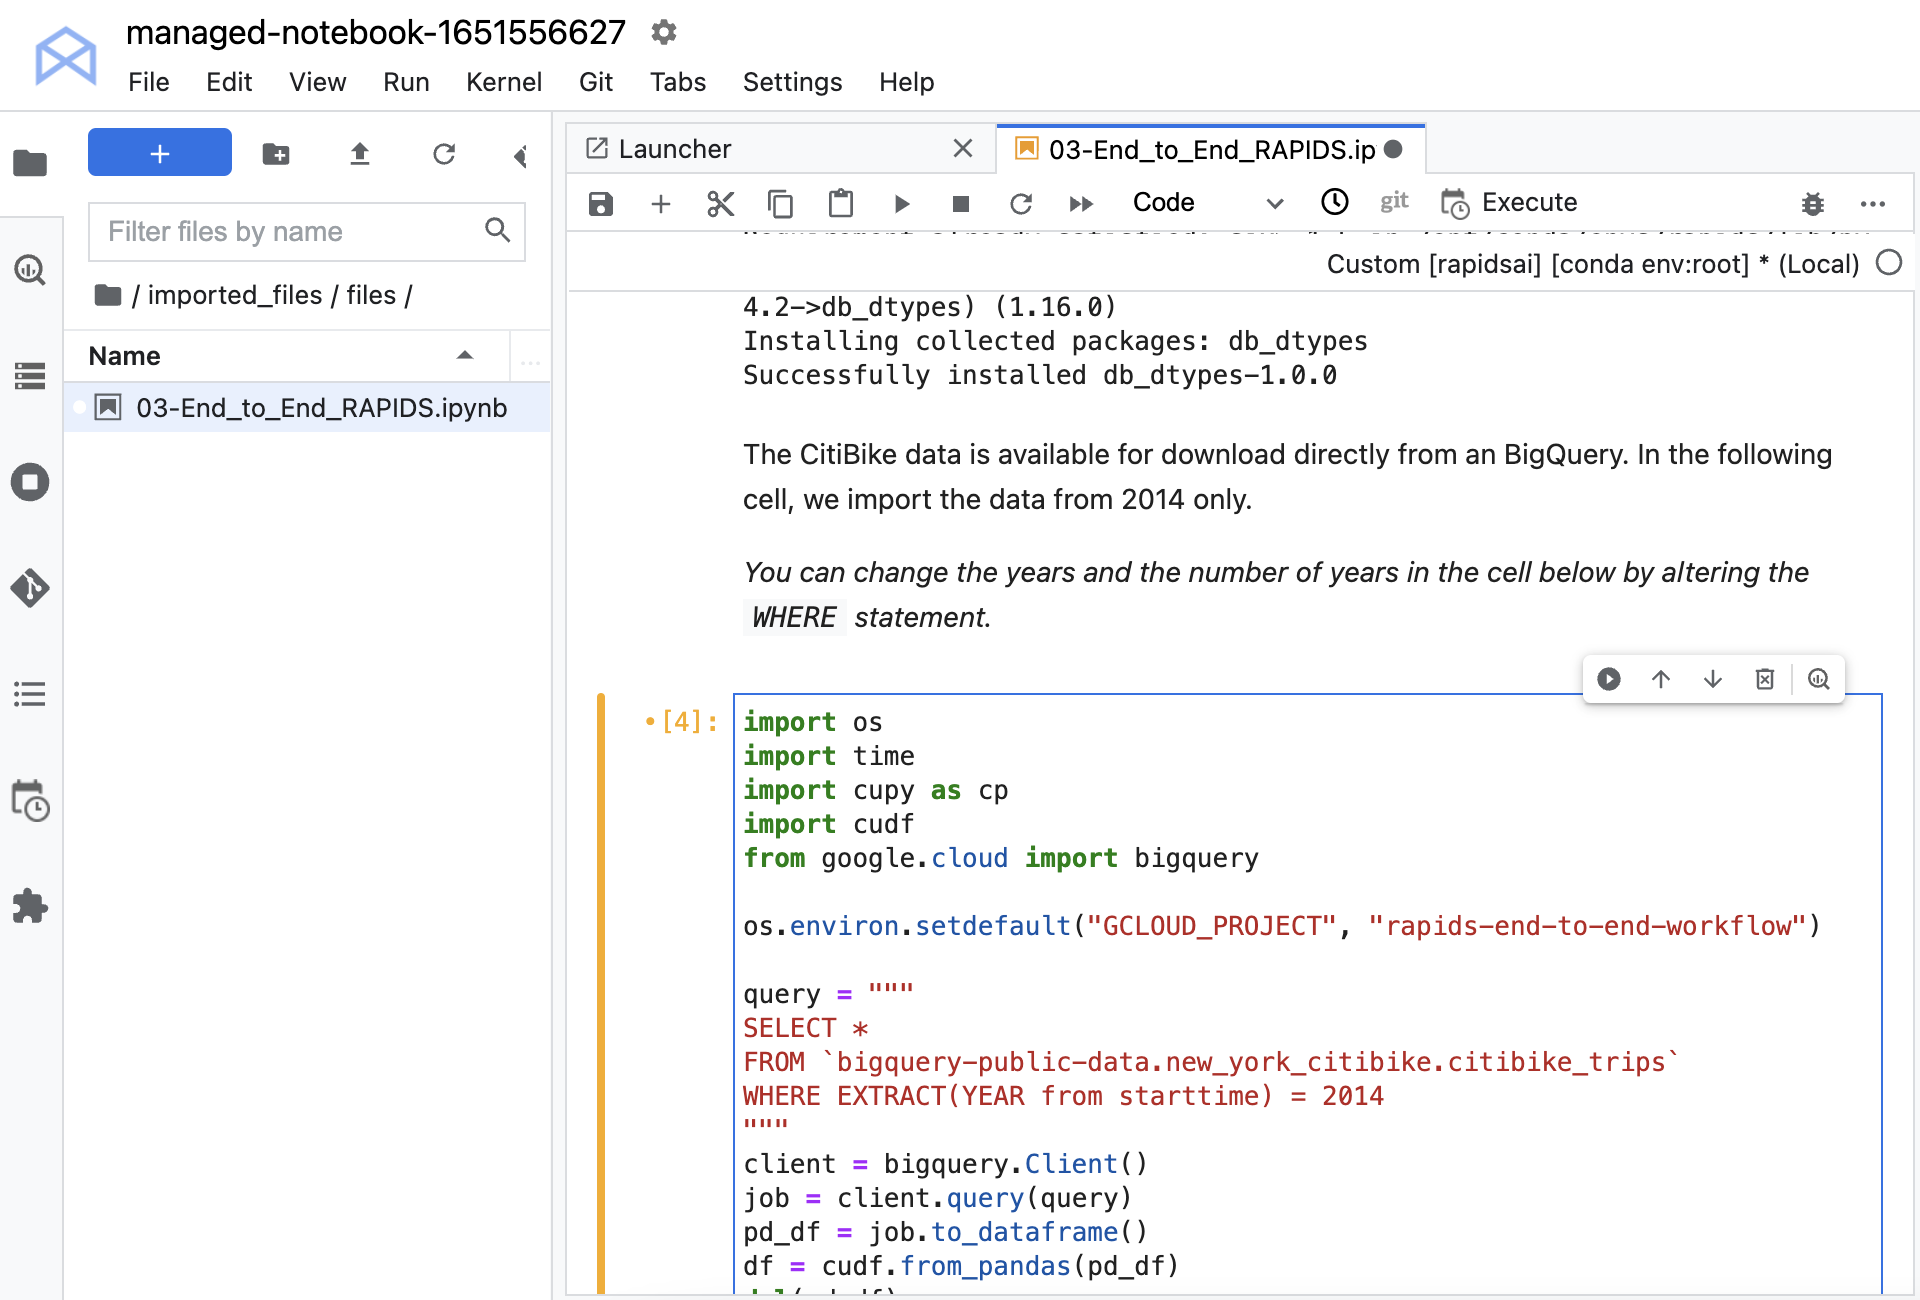 Screenshot showing modifying the code before running it so that the project ID is known to the environment and BigQuery can run. 